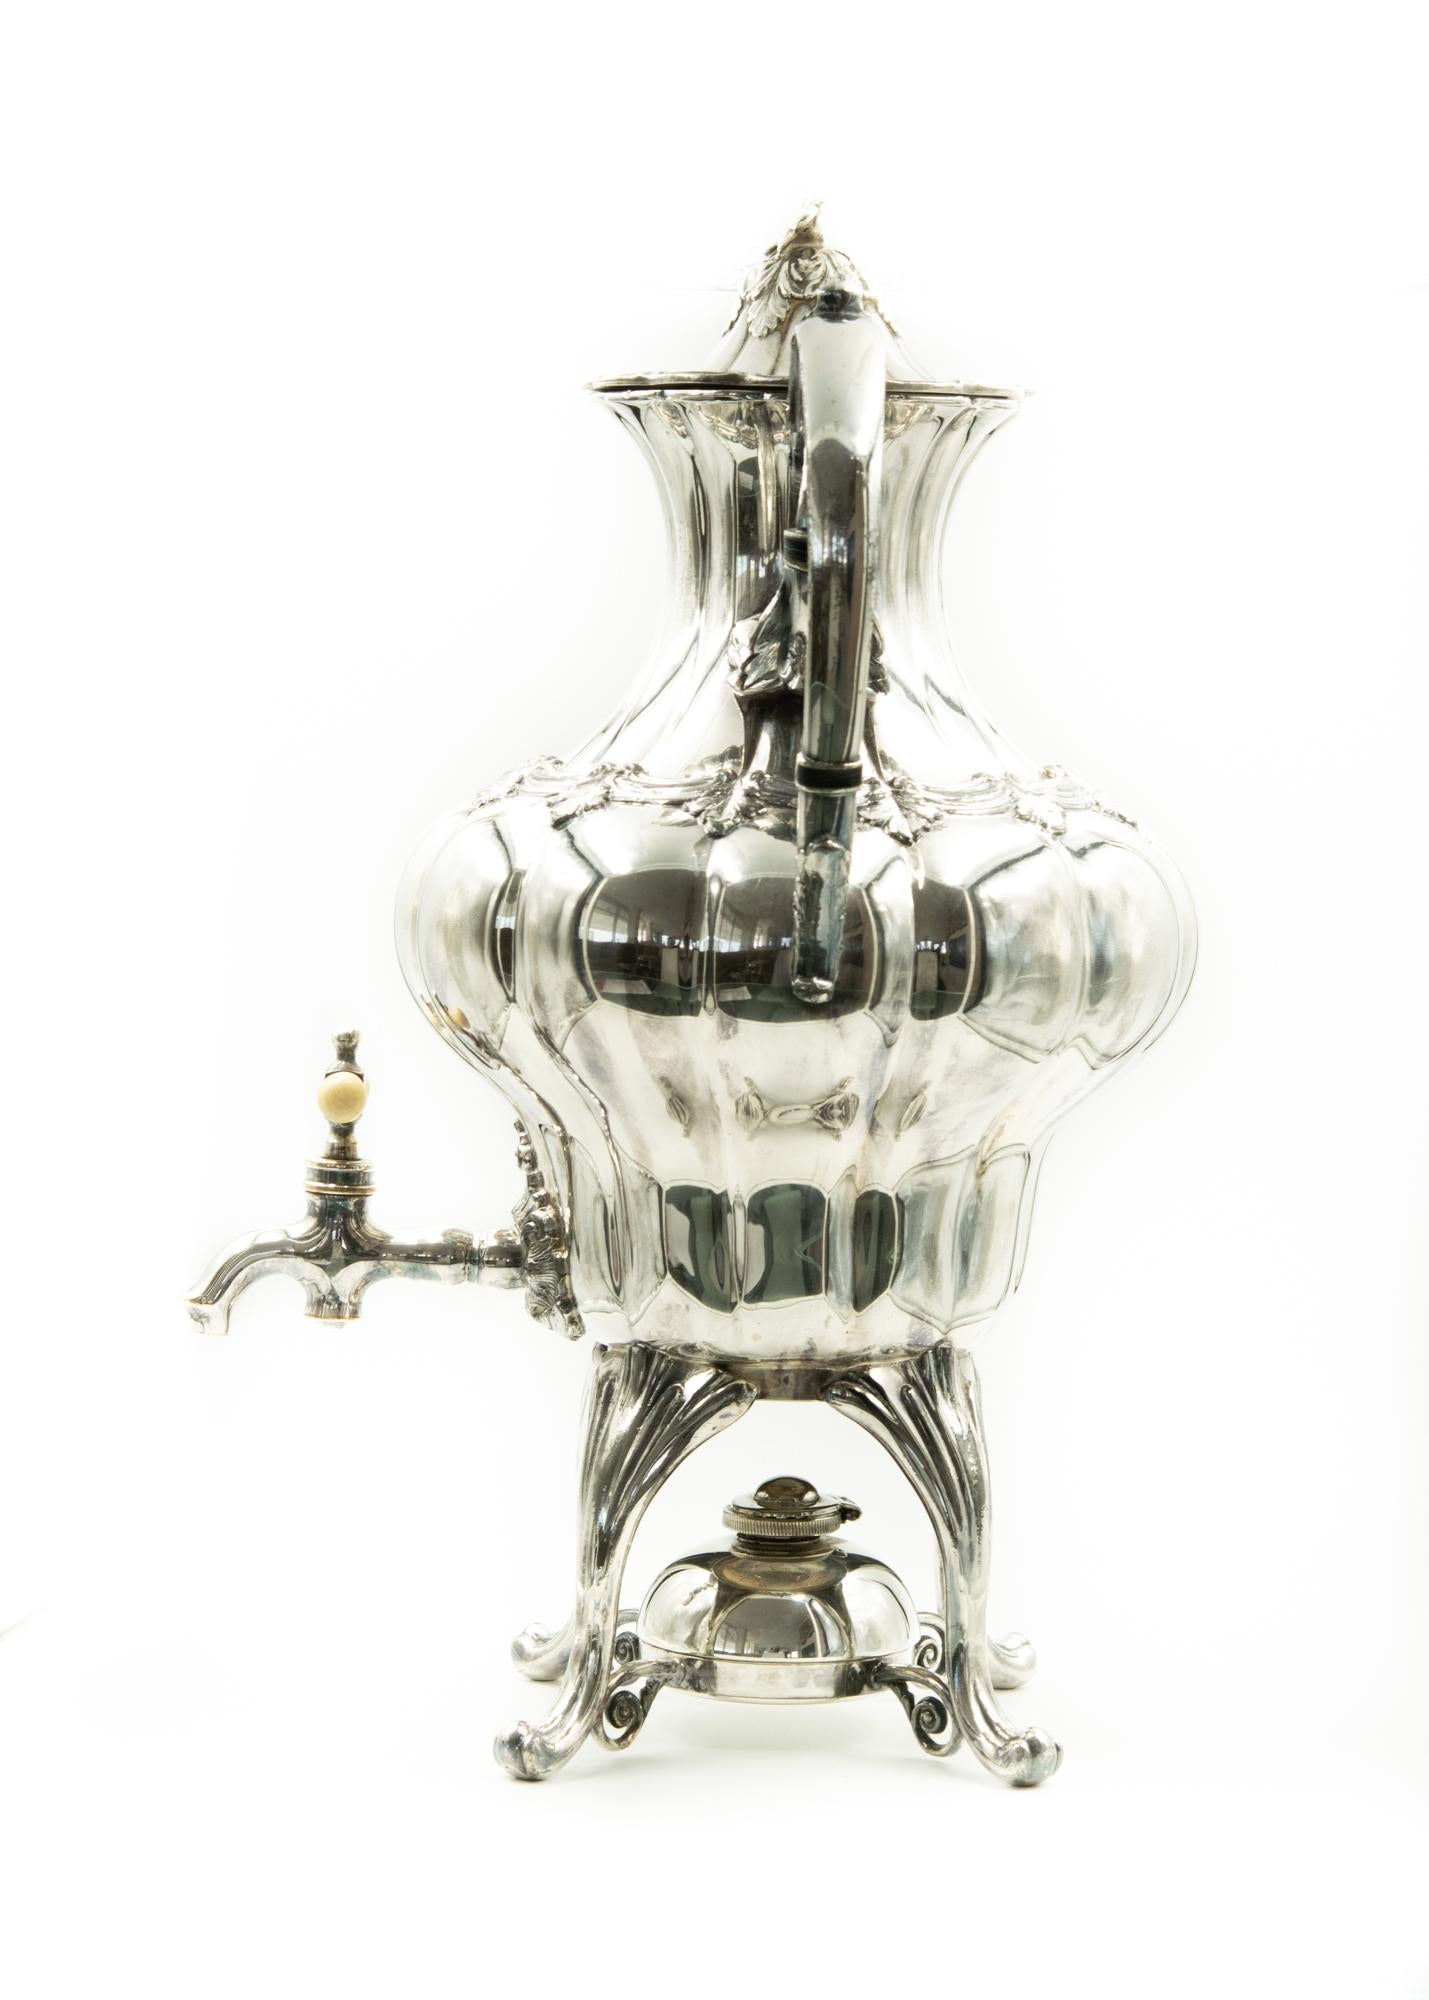 This late 19th century silver plate coffee urn is ornately designed with its flower finial, removable heating element and bone handle to protect your fingers from the heat. Probably late Victorian, it is charming on any buffet whether serving coffee